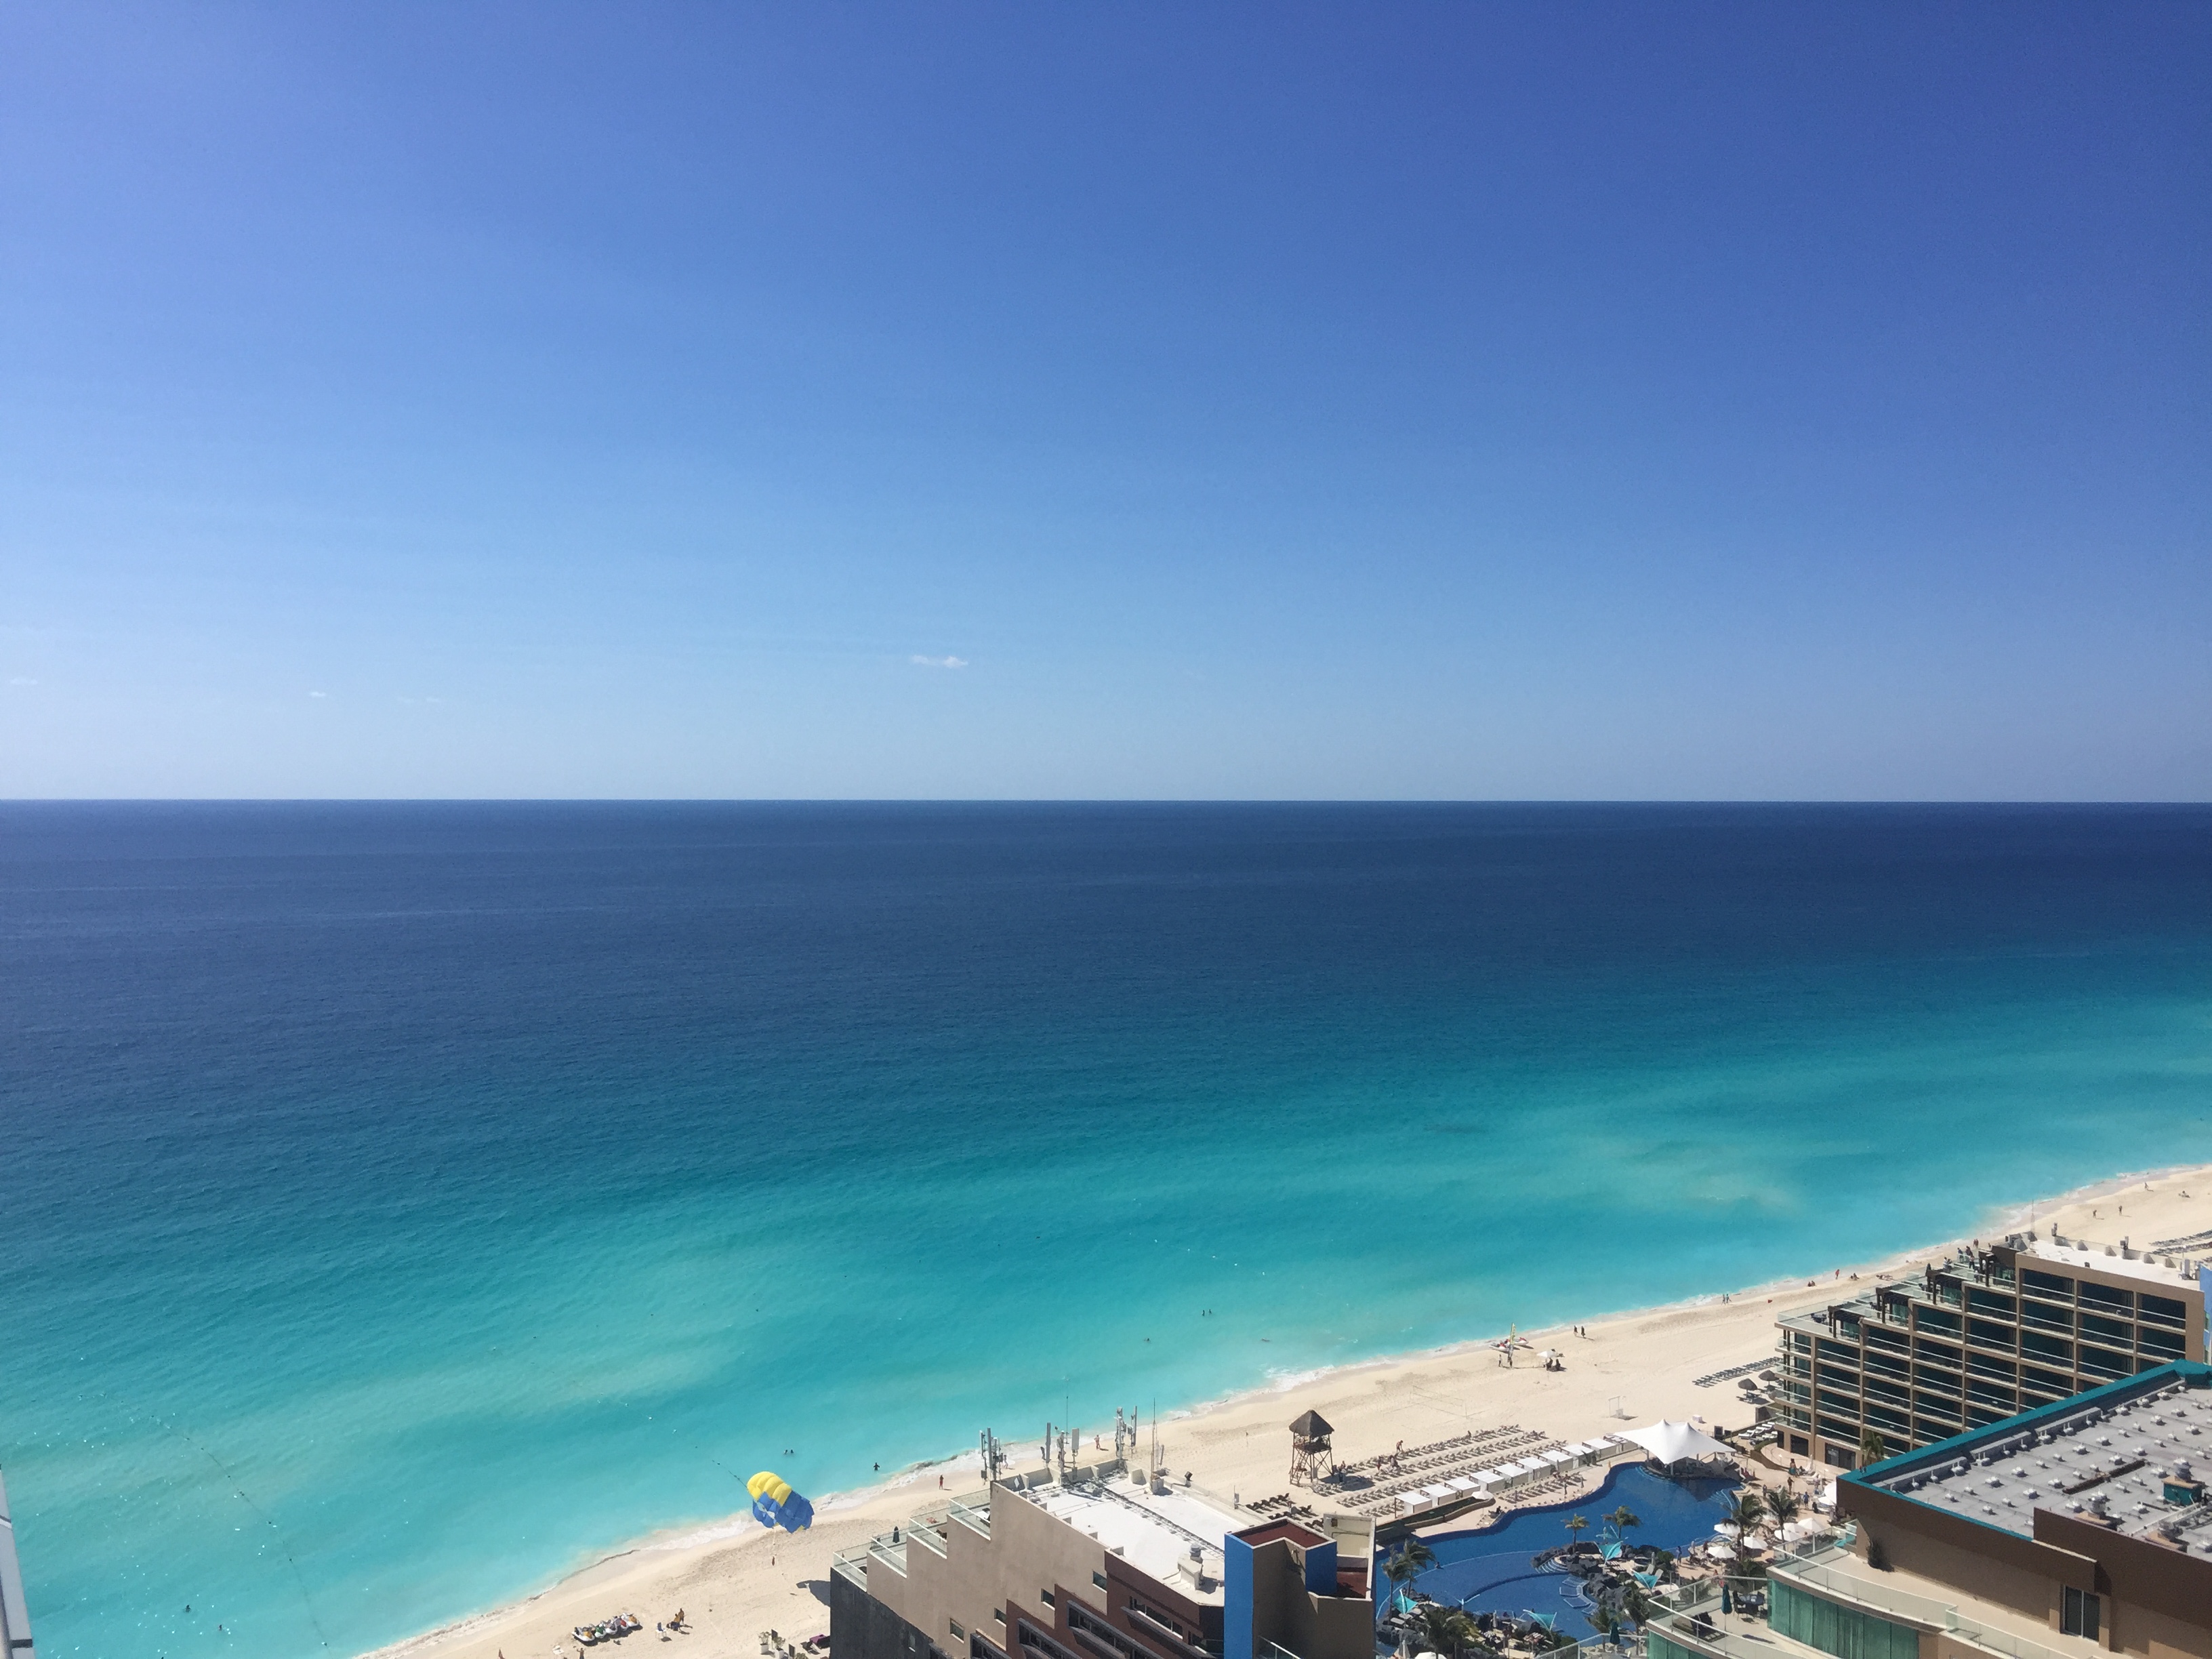 An inside look at Cancun, Mexico's Secrets the Vine Resort